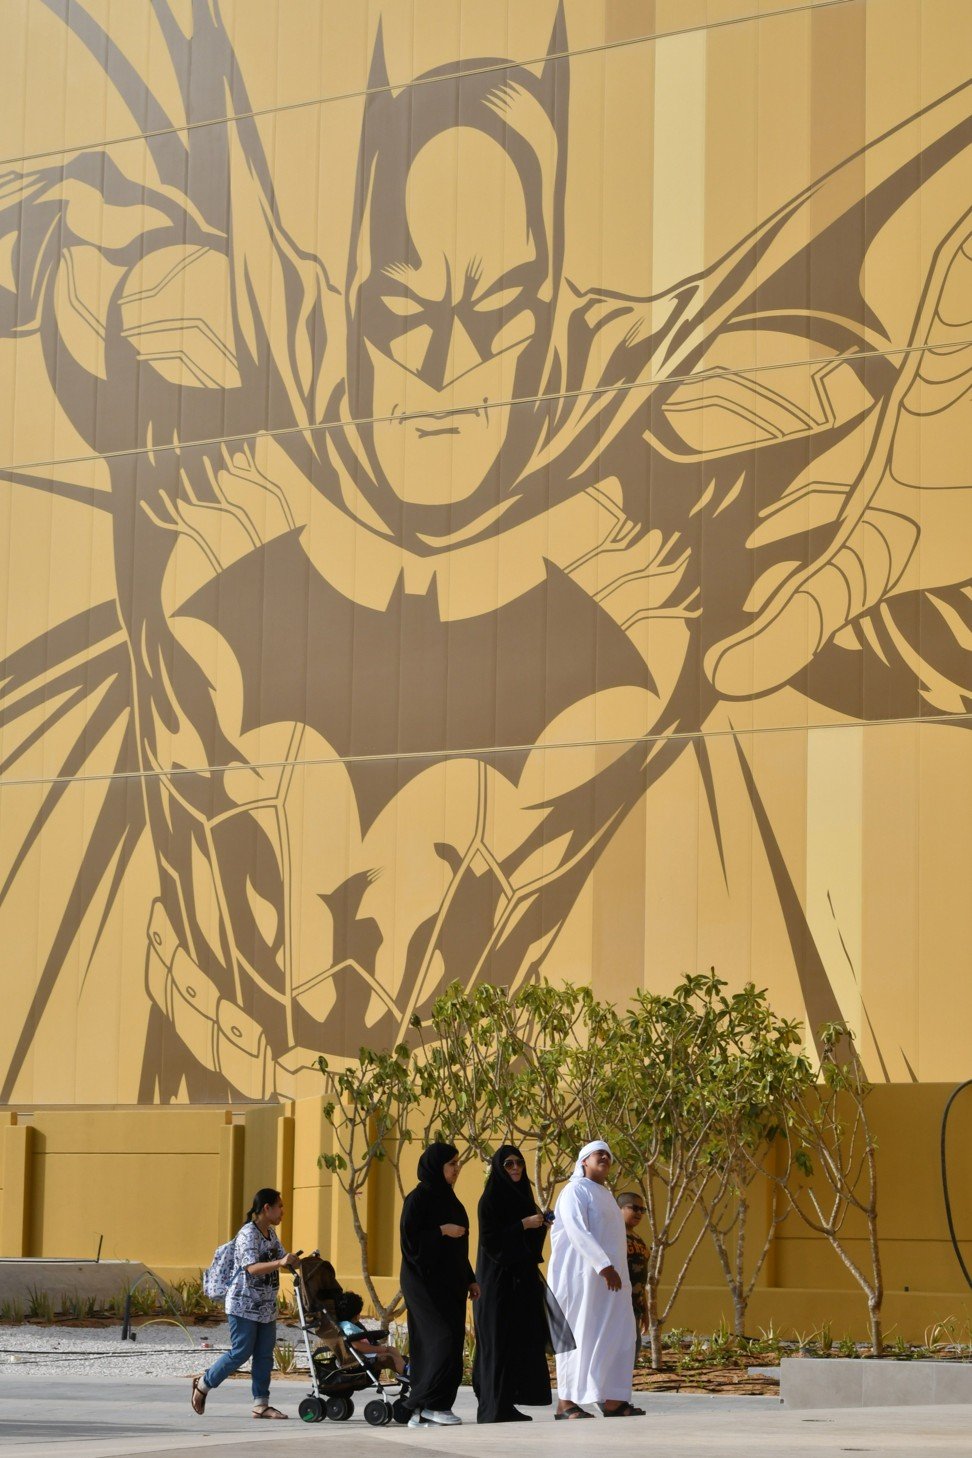 People arrive at Warner Brothers World in Abu Dhabi on July 27. UAE leaders seem eager to diversify away from their dependence on Western powers for security. Photo: AFP